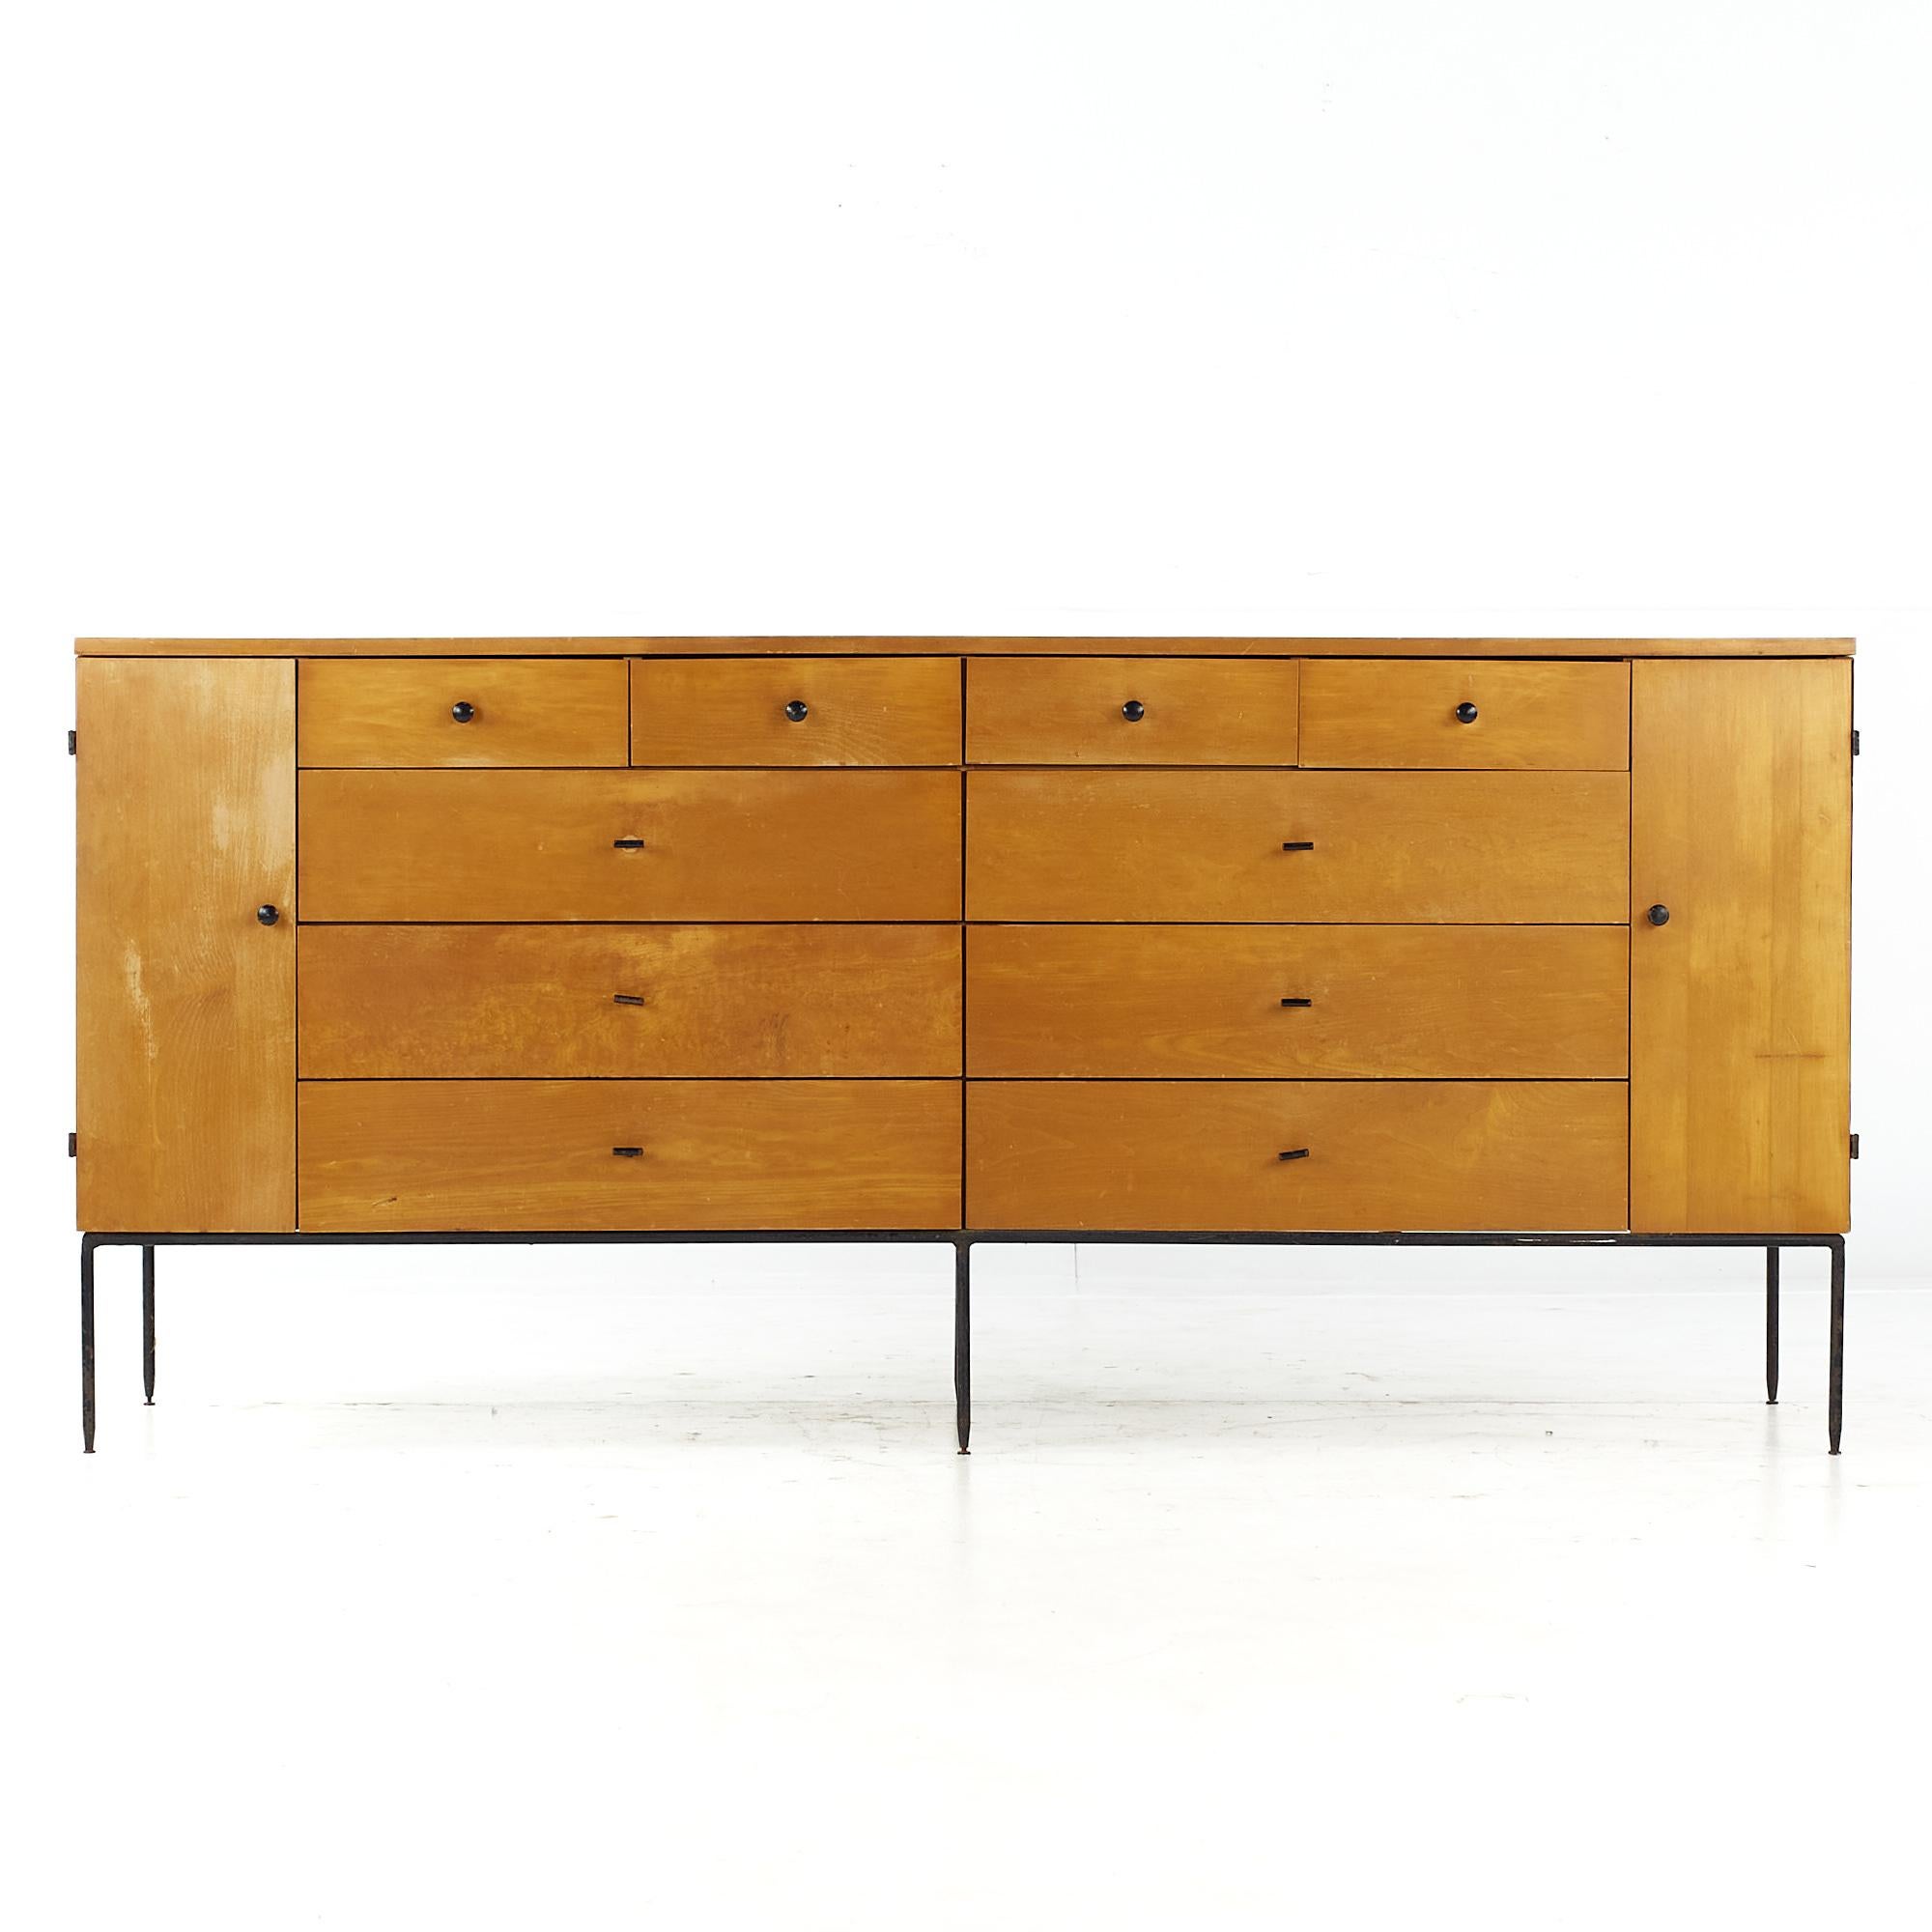 Paul McCobb for Winchendon mid century 20 drawer lowboy dresser with iron legs and t pulls

This lowboy measures: 72 wide x 18 deep x 32.25 inches high

All pieces of furniture can be had in what we call restored vintage condition. That means